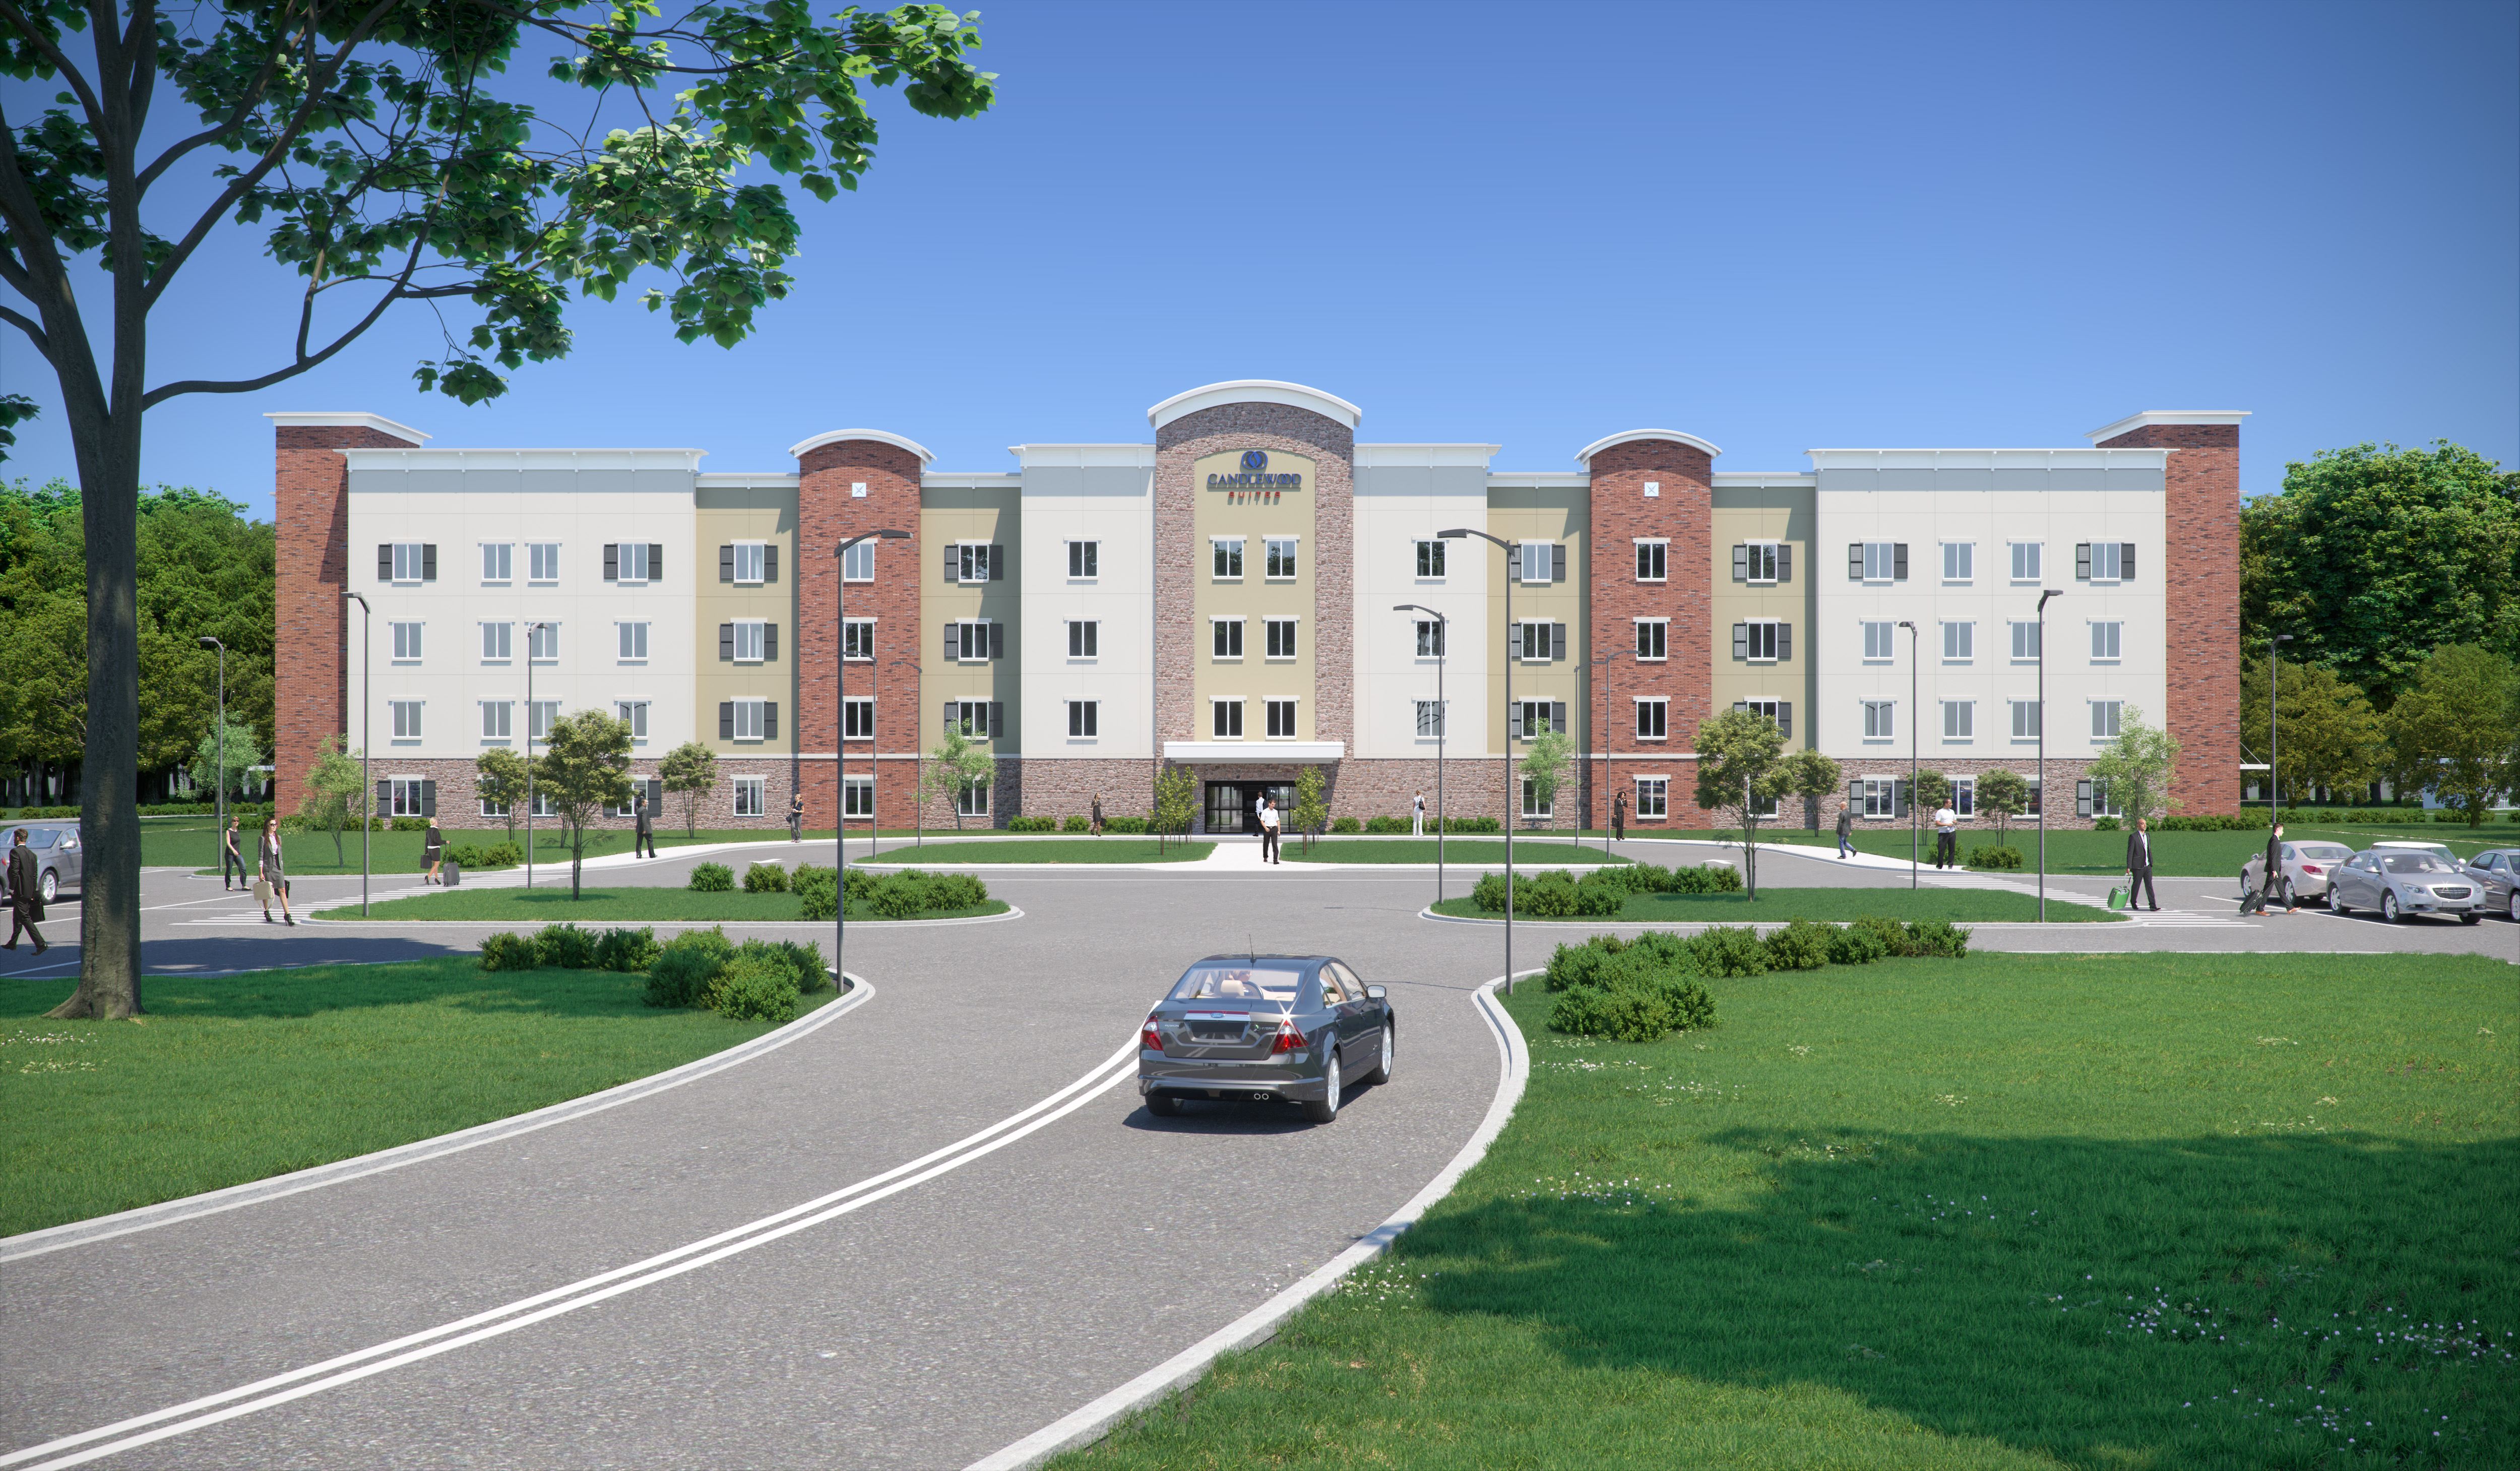 Lendlease will open the Candlewood Suites hotel on Fort Drum in Watertown NY later this year